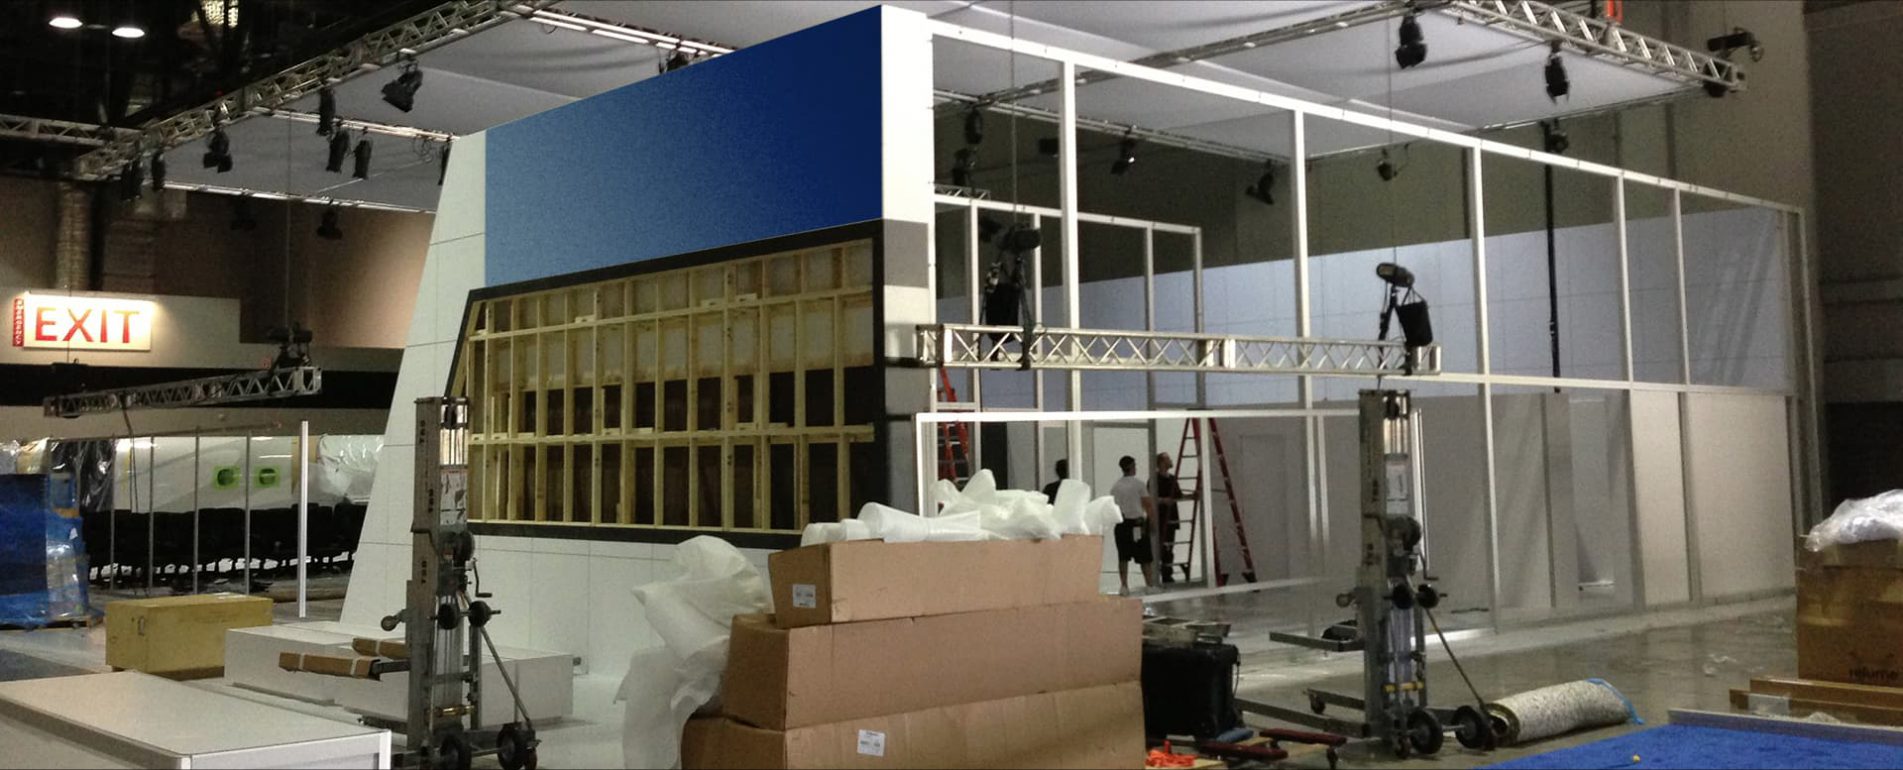 group esi installation montage stand salons expositions